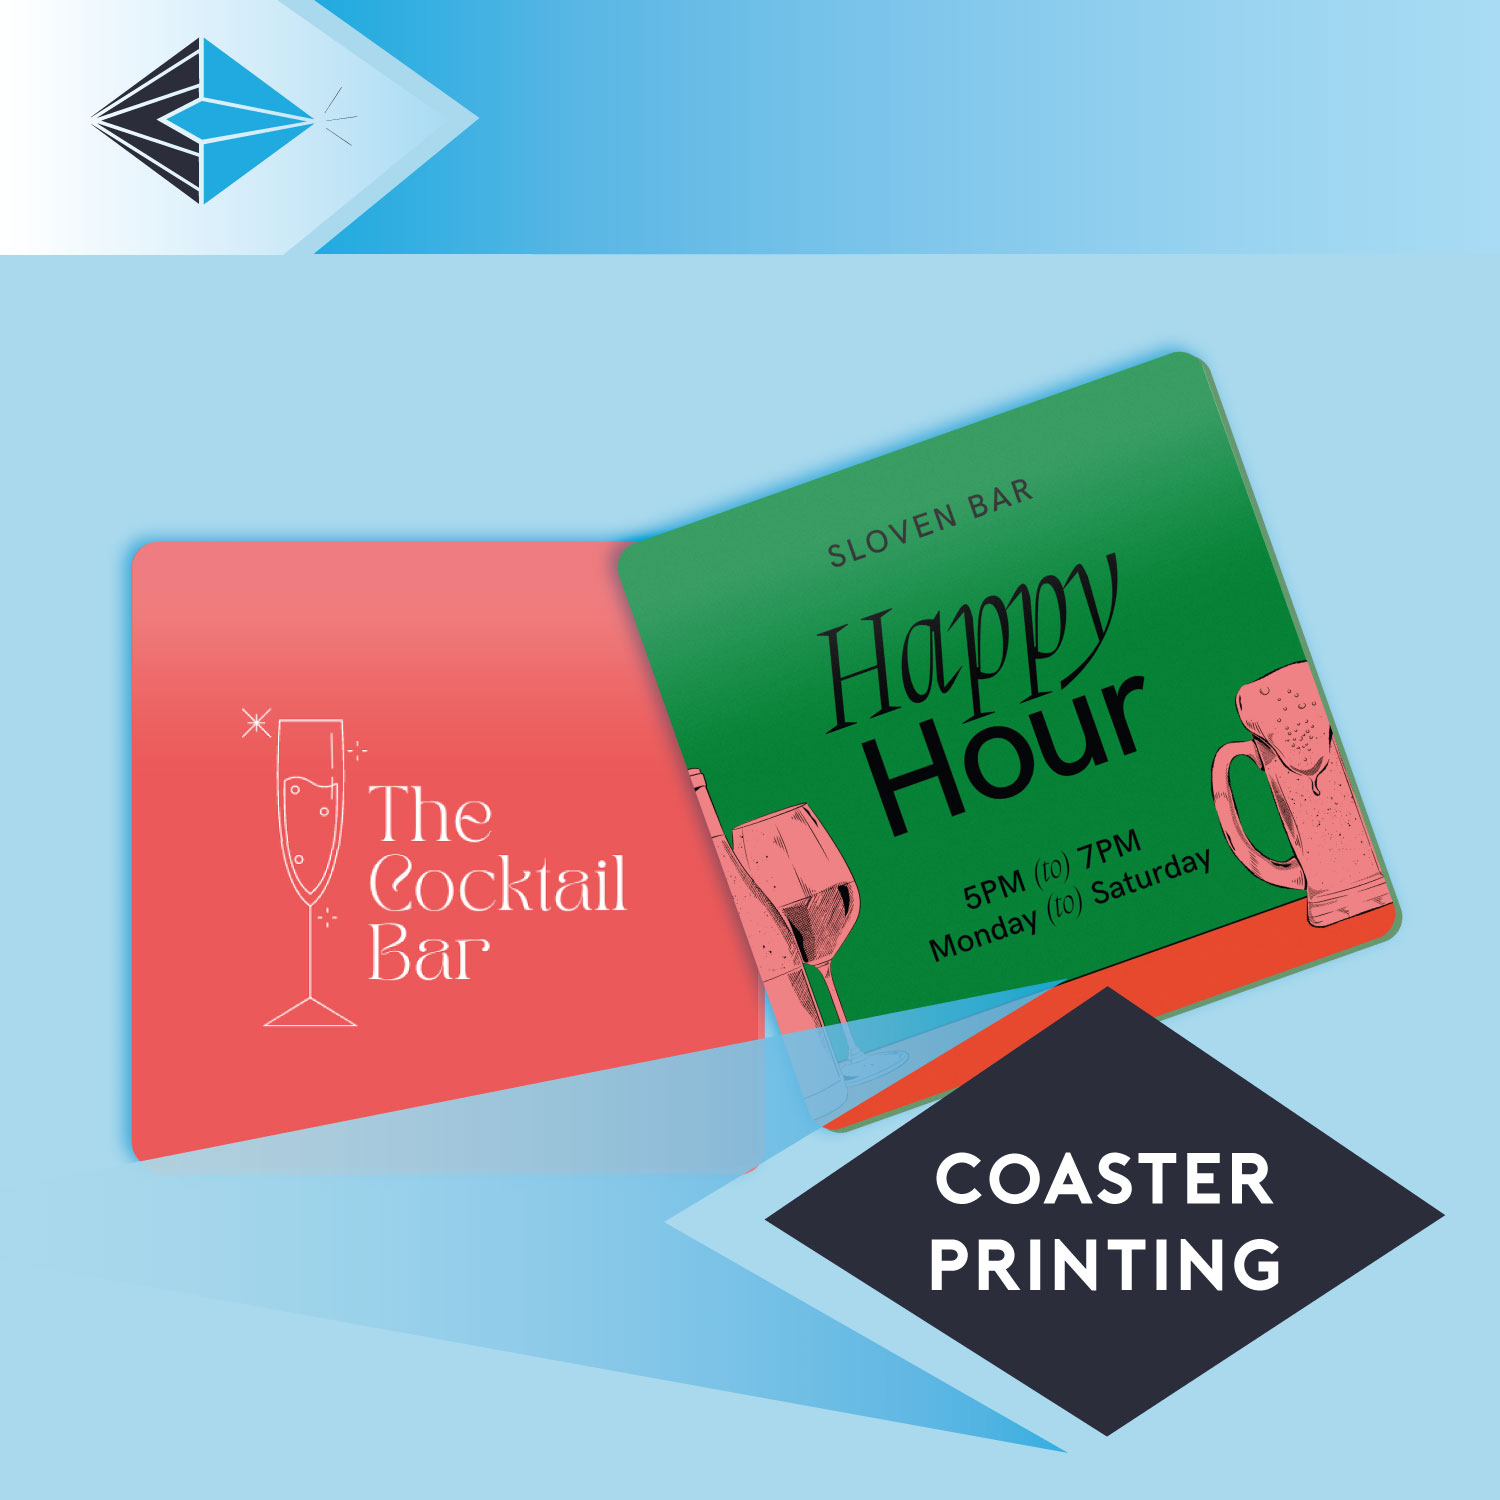 Coaster printing print your own coasters uk stockport manchester